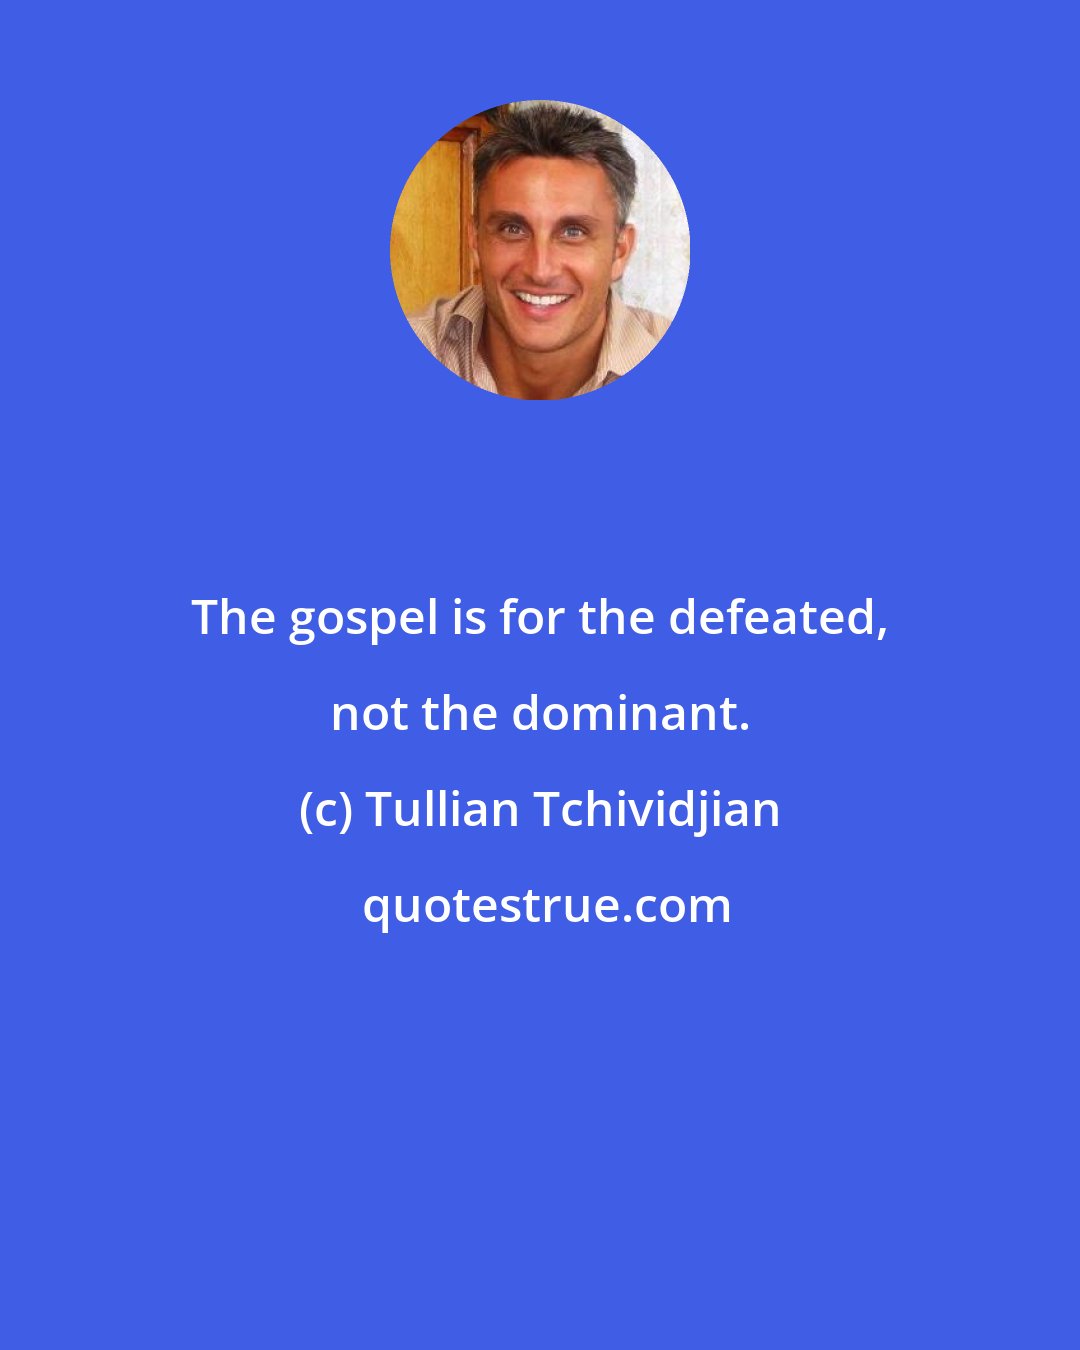 Tullian Tchividjian: The gospel is for the defeated, not the dominant.